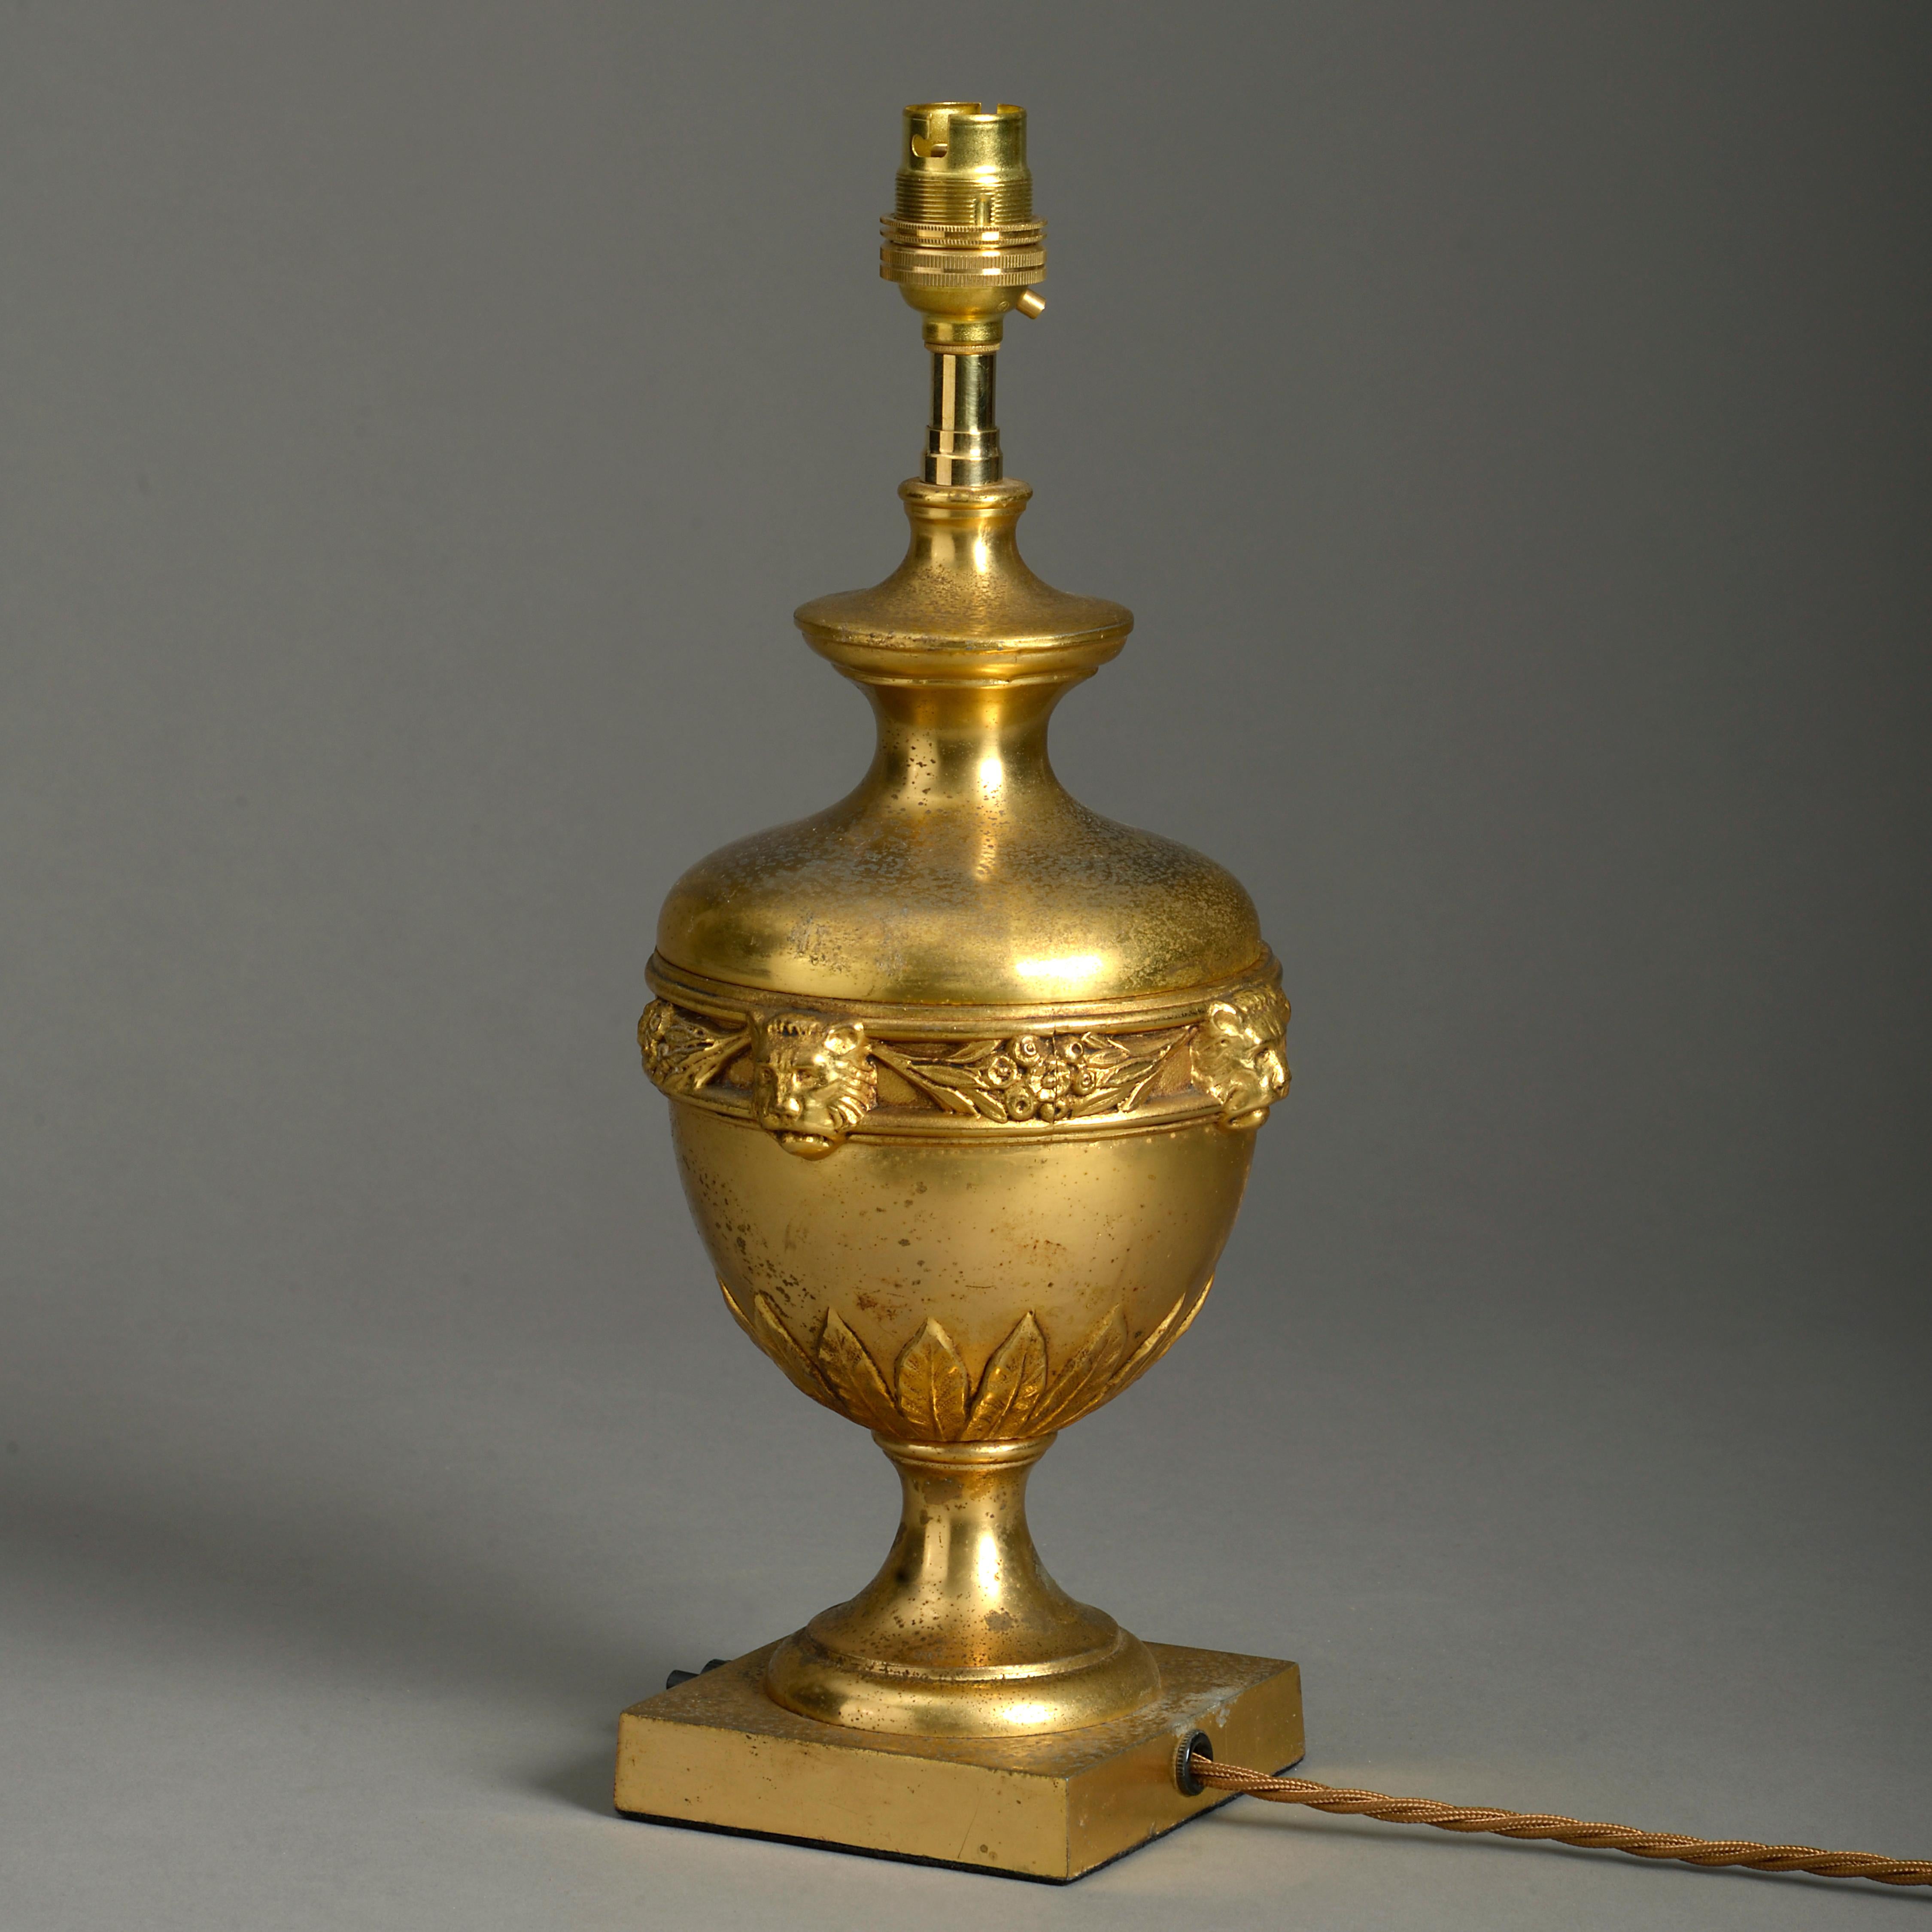 Neoclassical Revival Early 20th Century Gilt Metal Urn Lamp